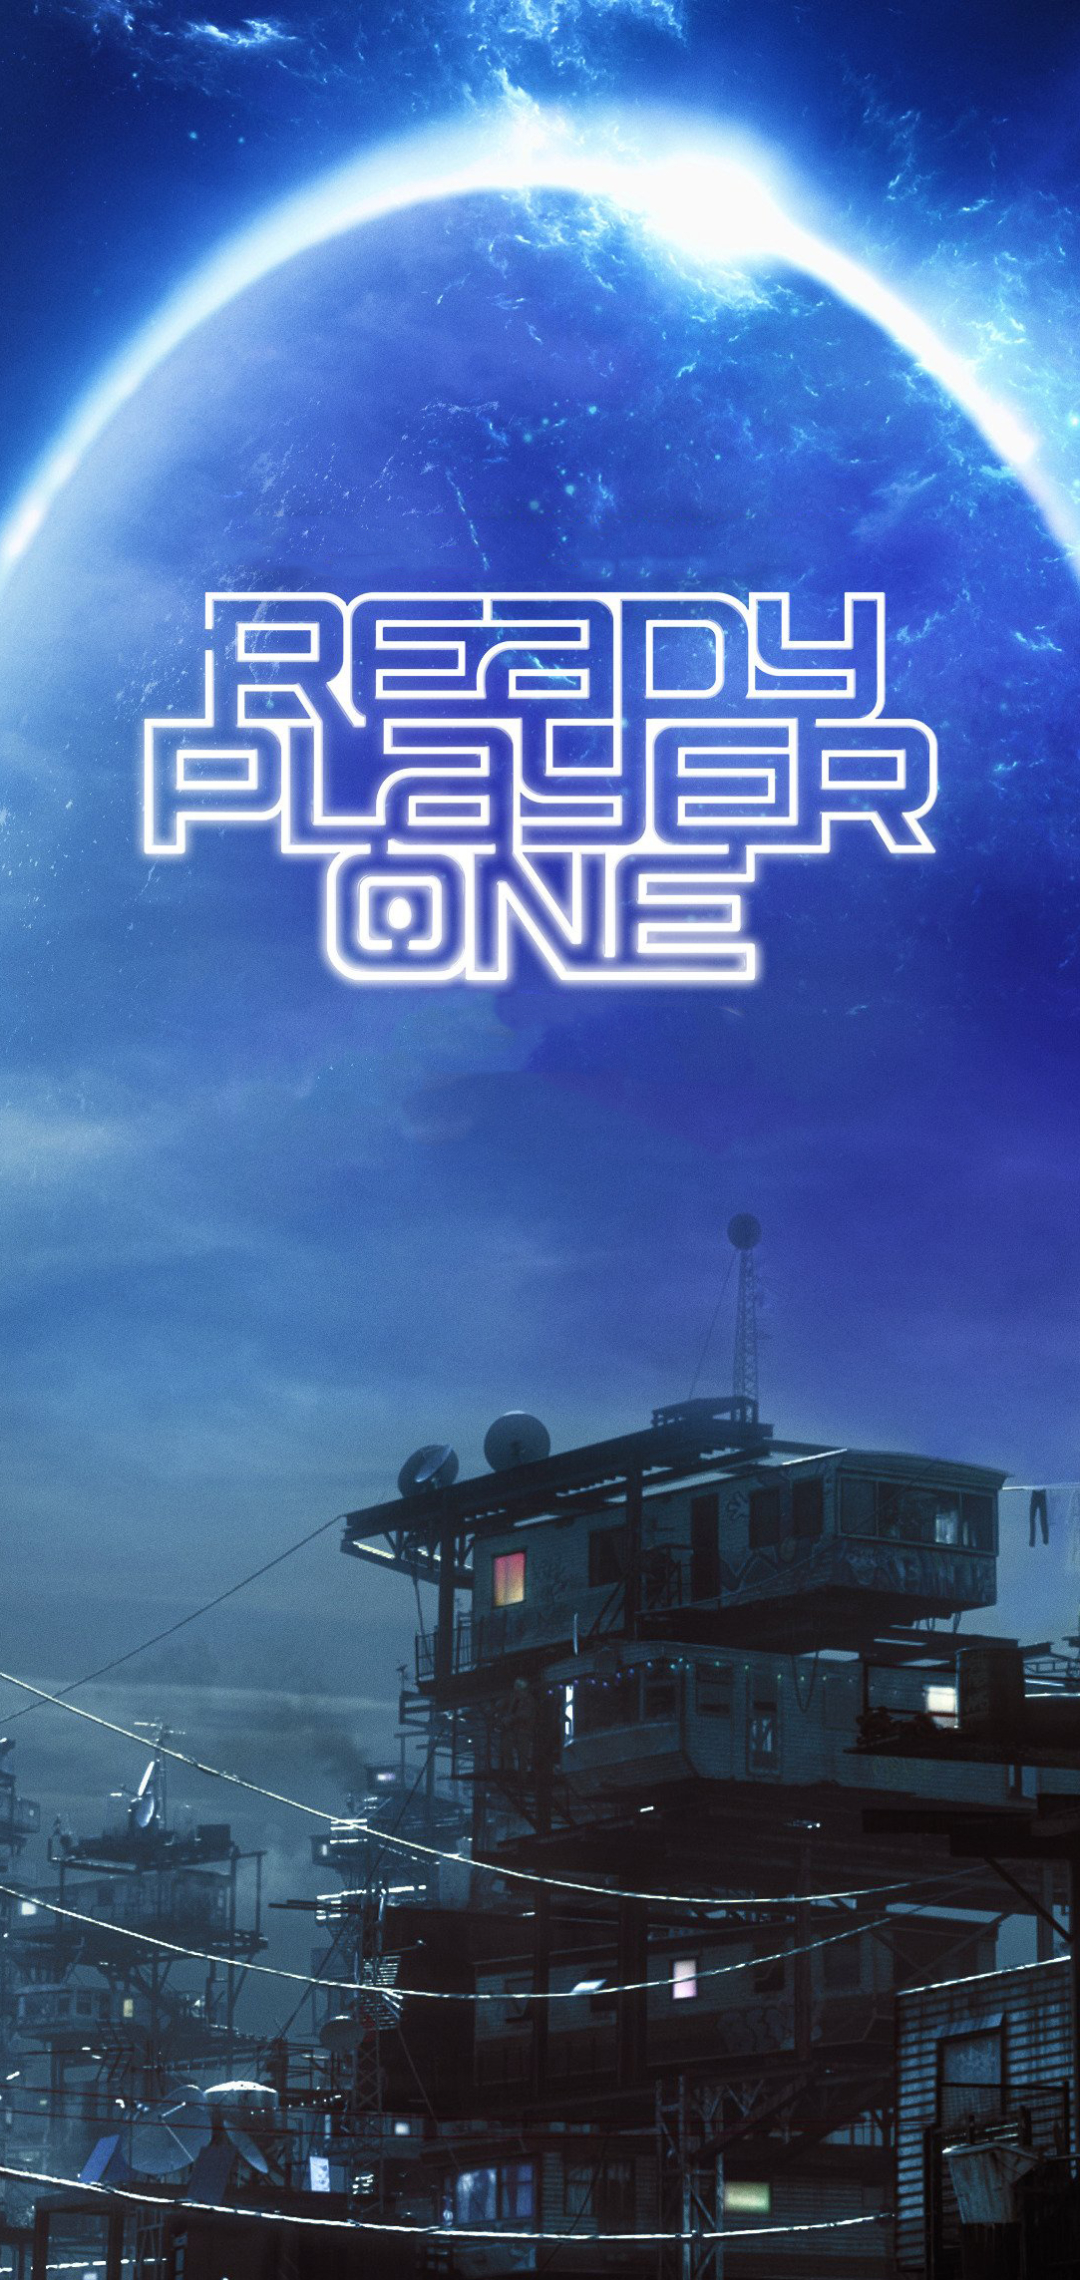 Ready Player One Bluray disc 4K resolution 8K resolution Wade Owen Watts Ready  Player One desktop Wallpaper glasses film png  PNGWing